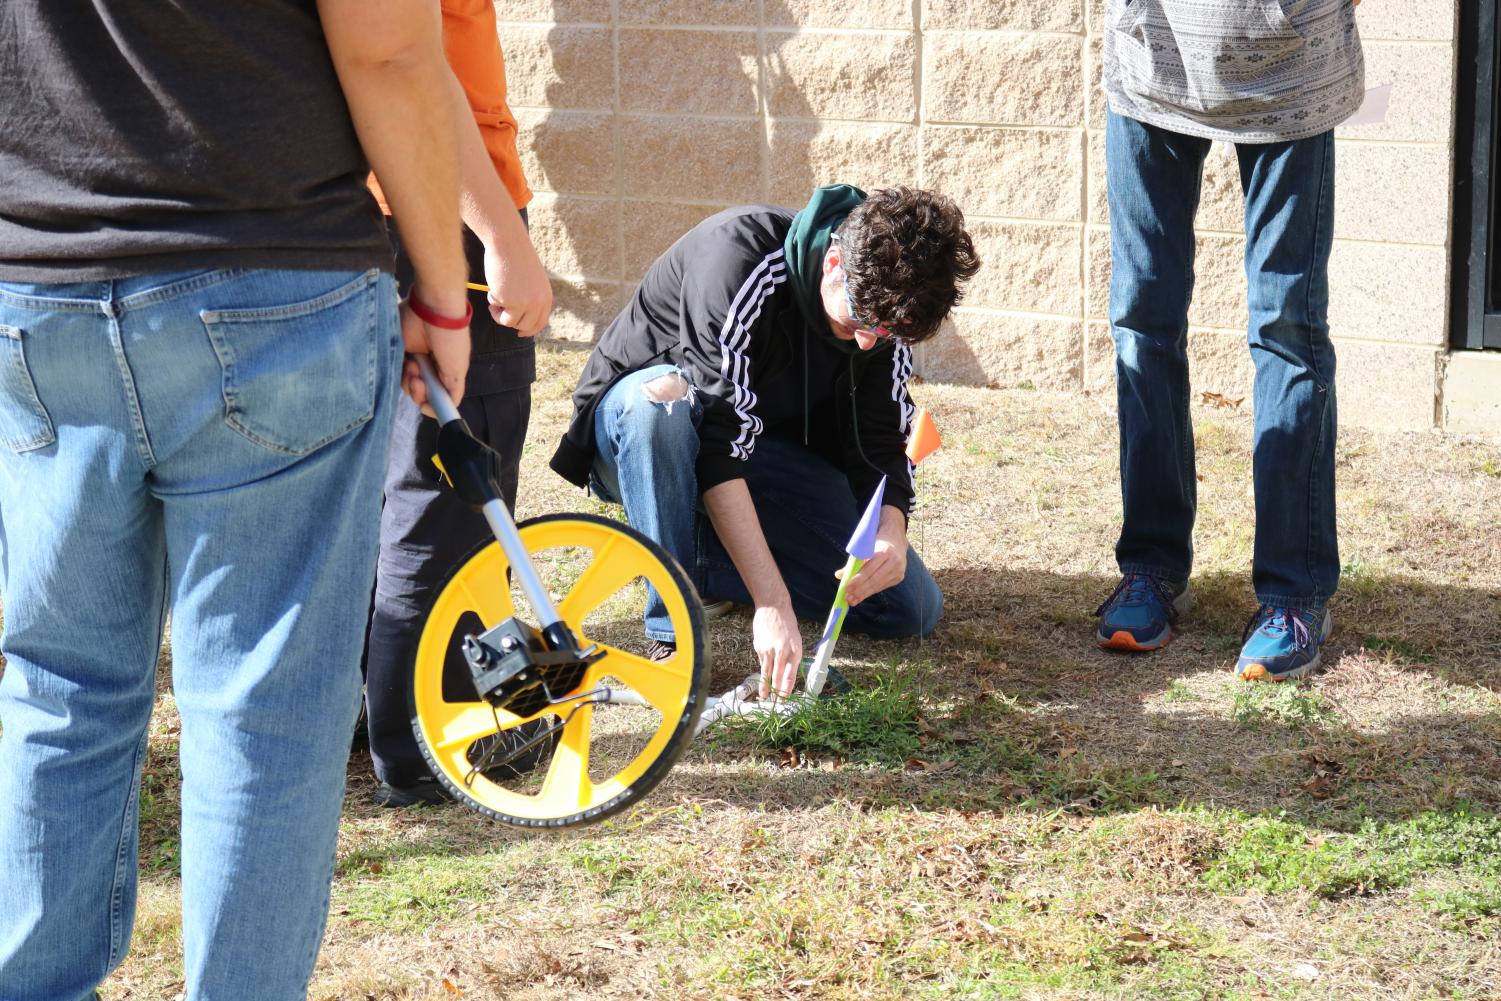 General+Physics+Students+Launch+Into+Projectile+Motion+Unit+with+Paper+Rockets